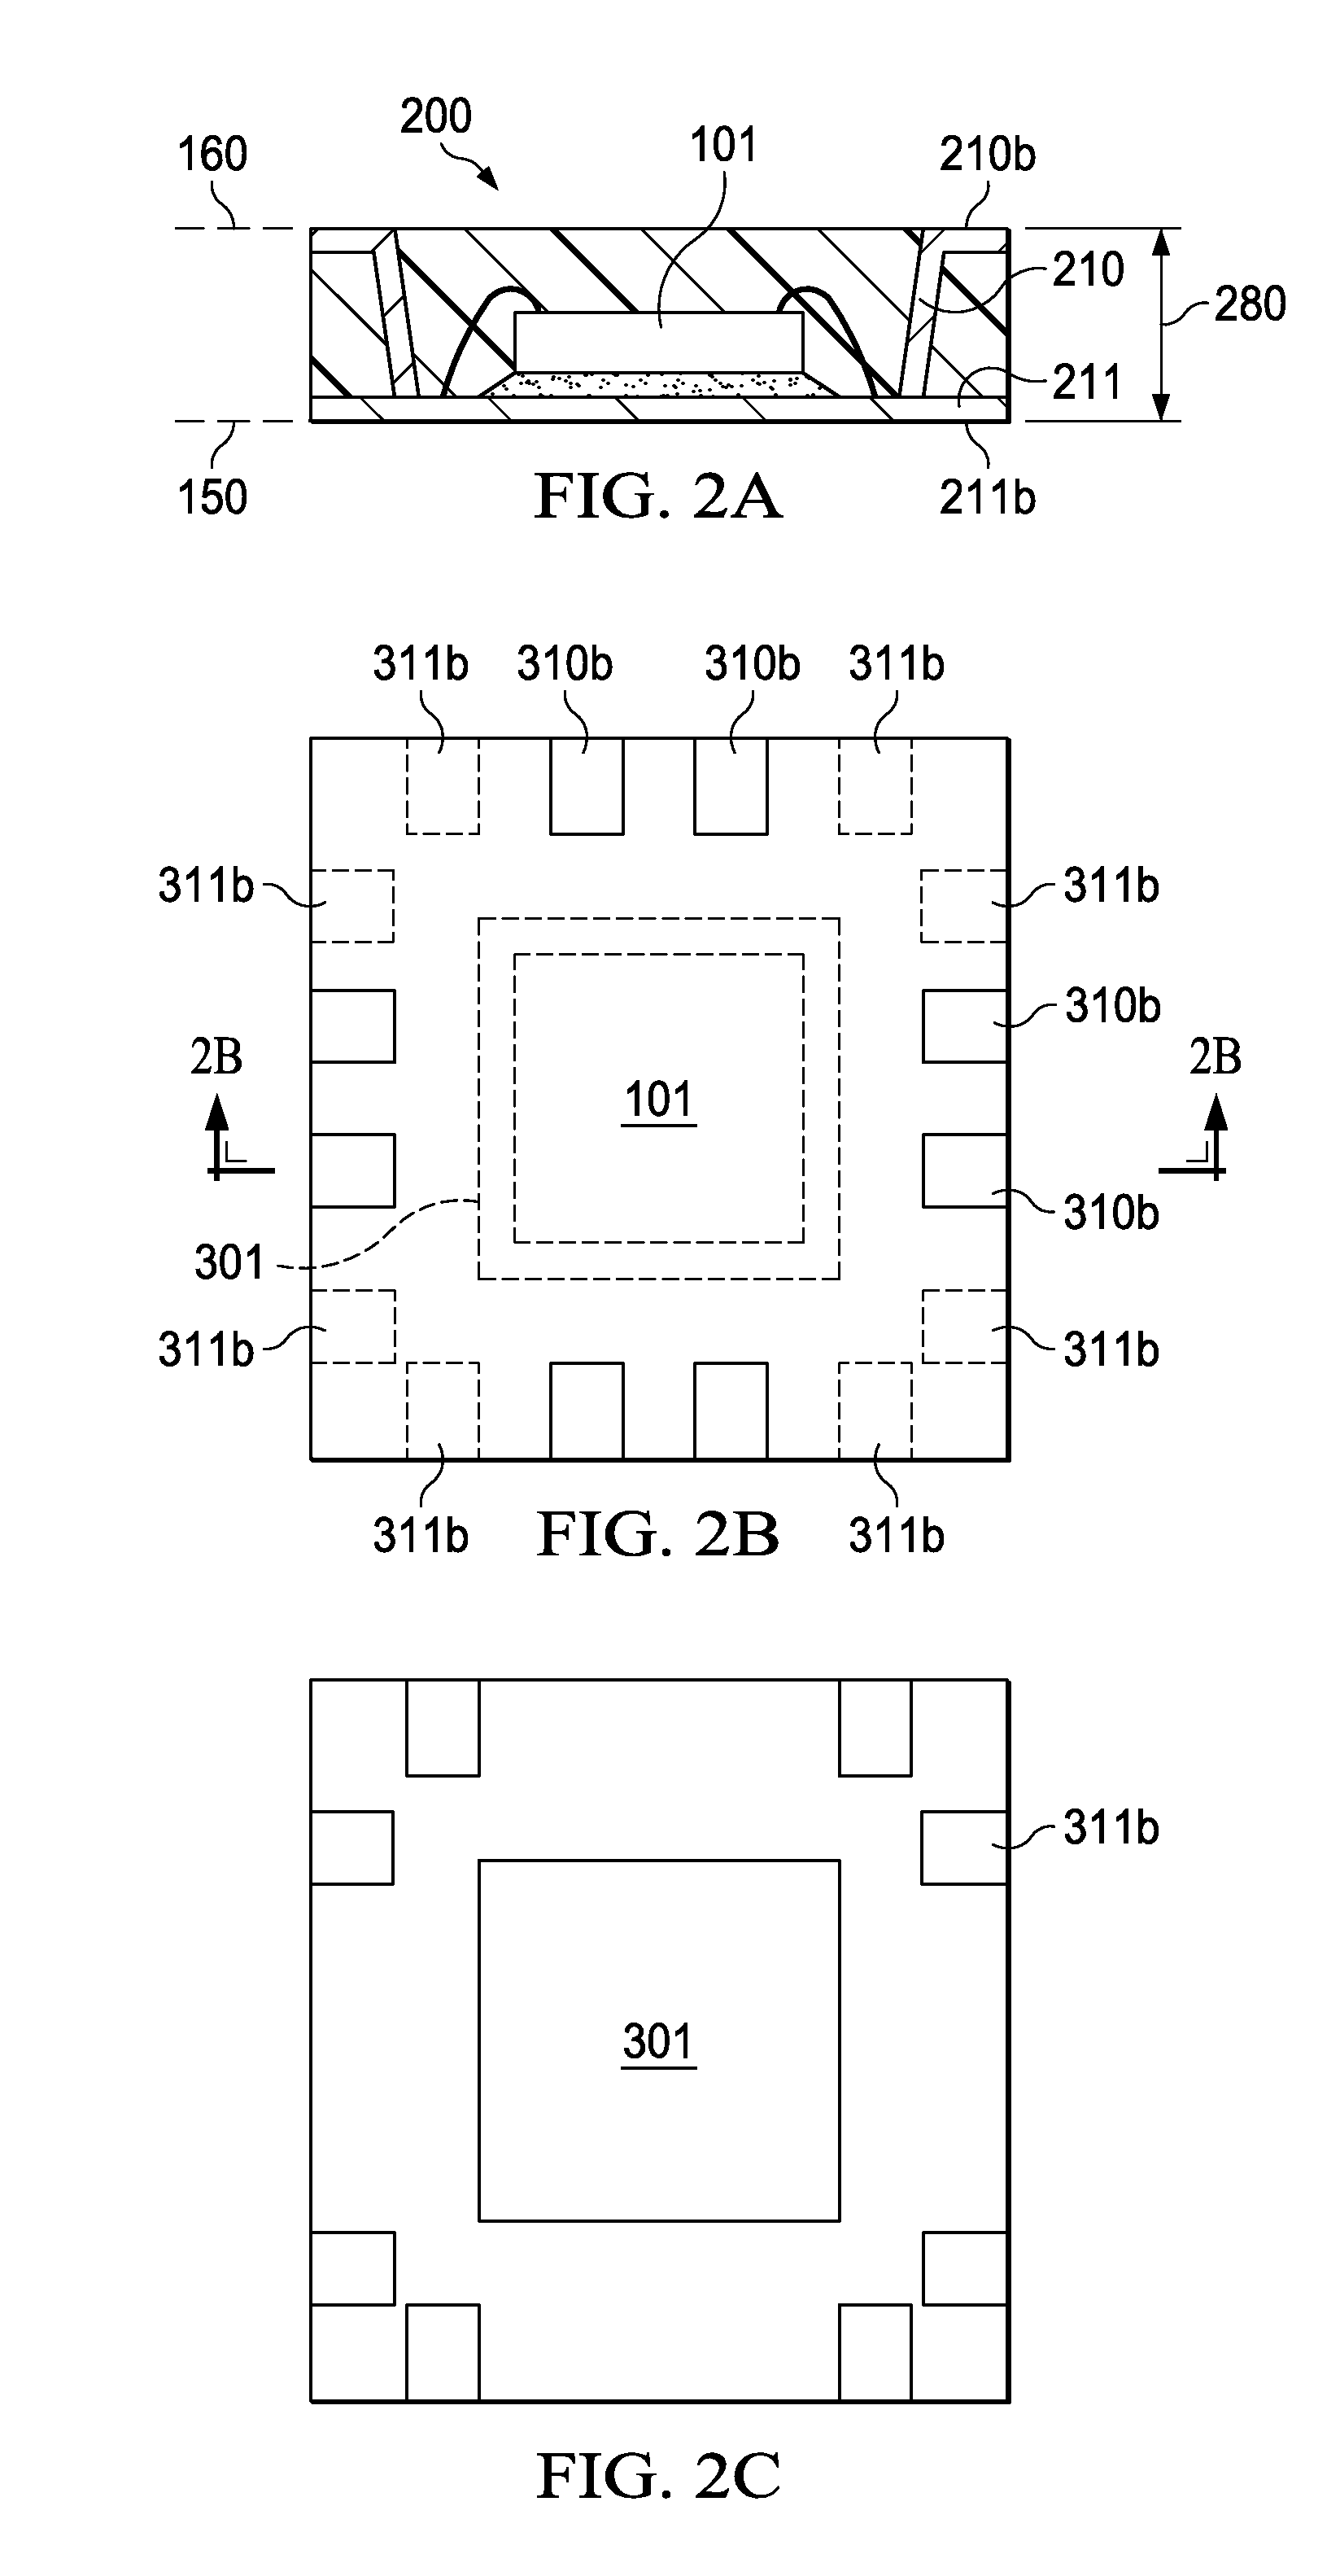 Leadframe-Based Semiconductor Package Having Terminals on Top and Bottom Surfaces